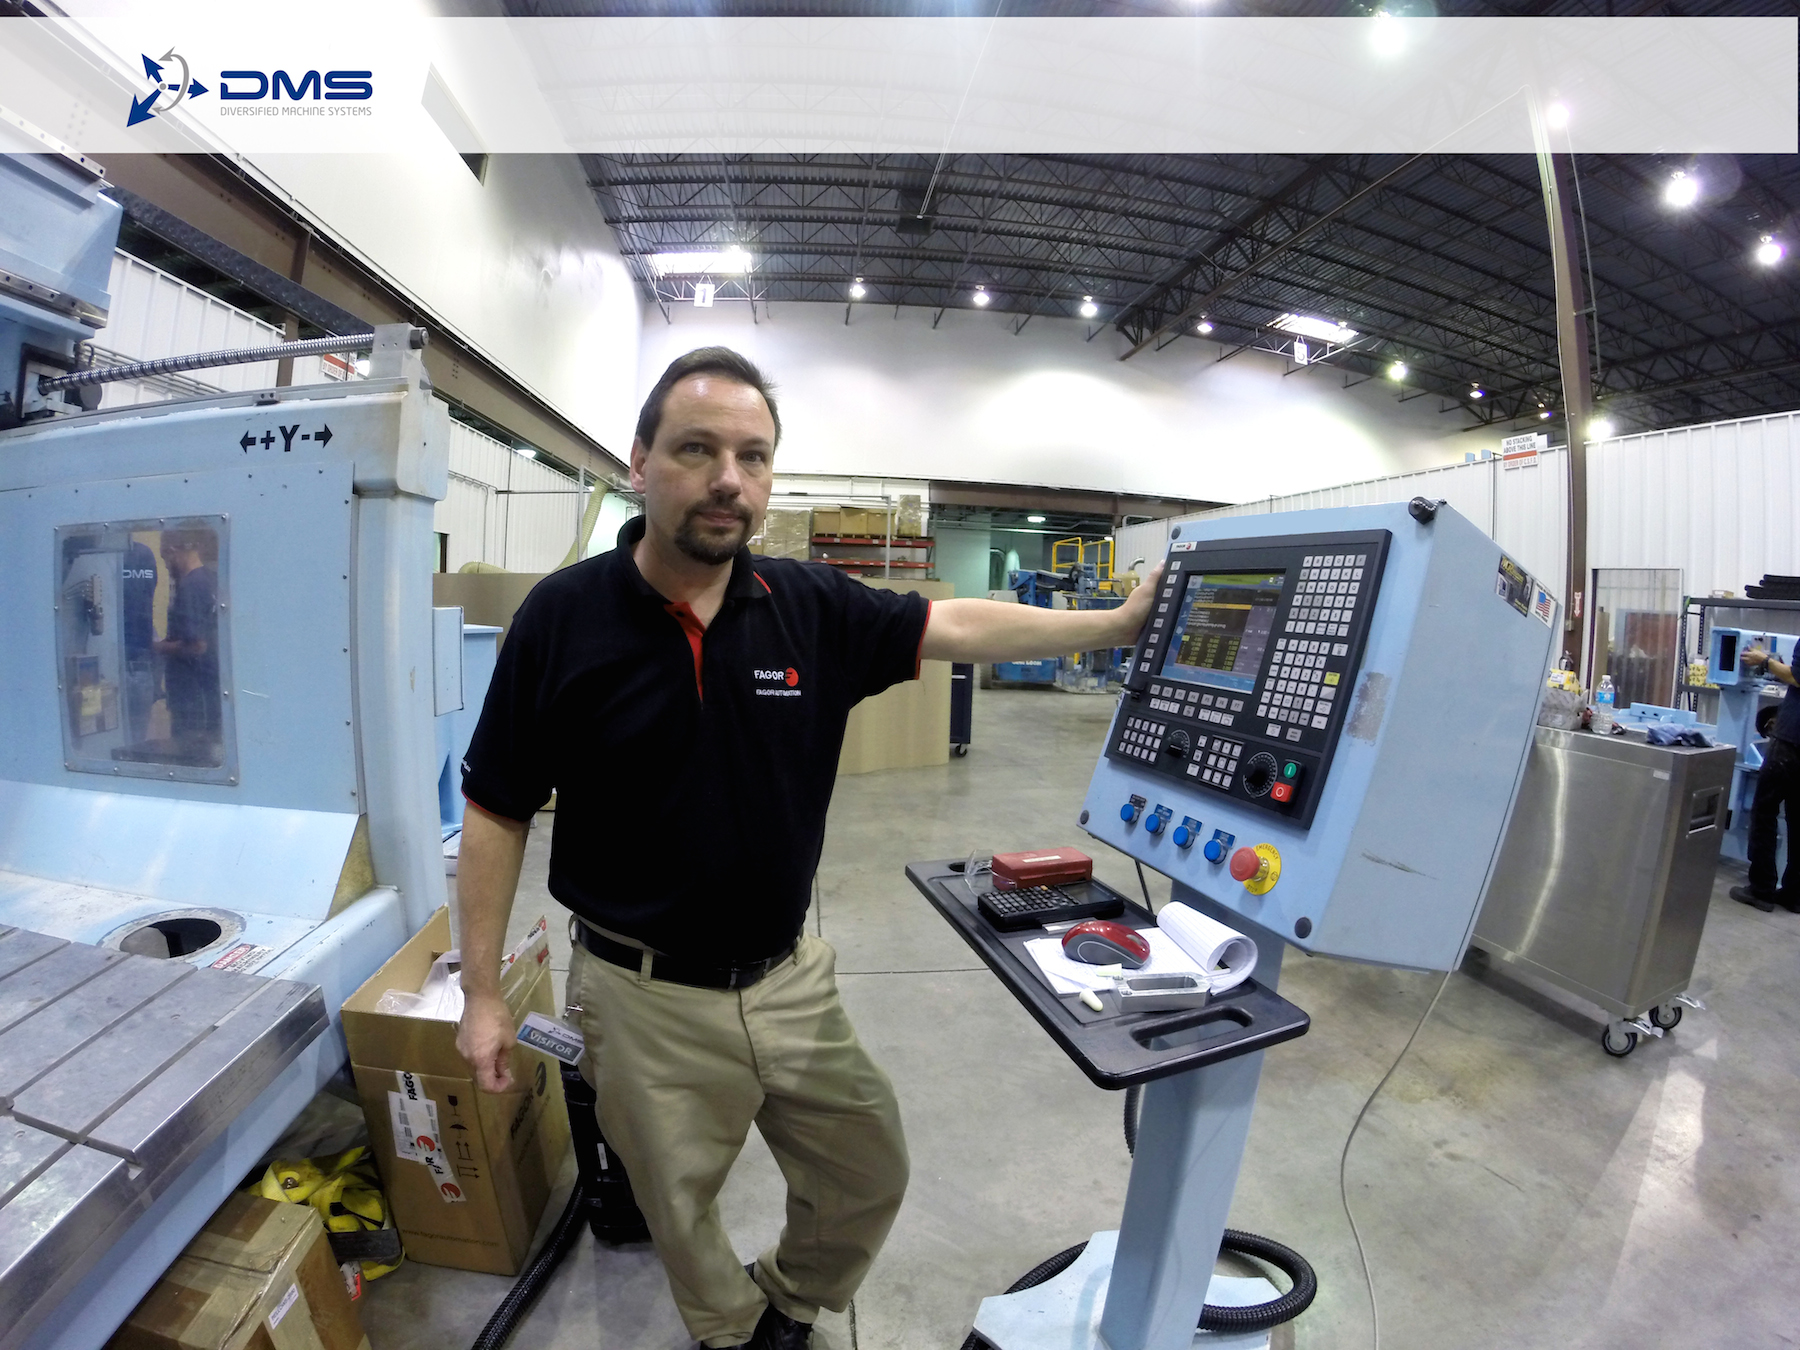 DMS CNC Routers Fagor Automation Renishaw Integration for Probing and Tooling